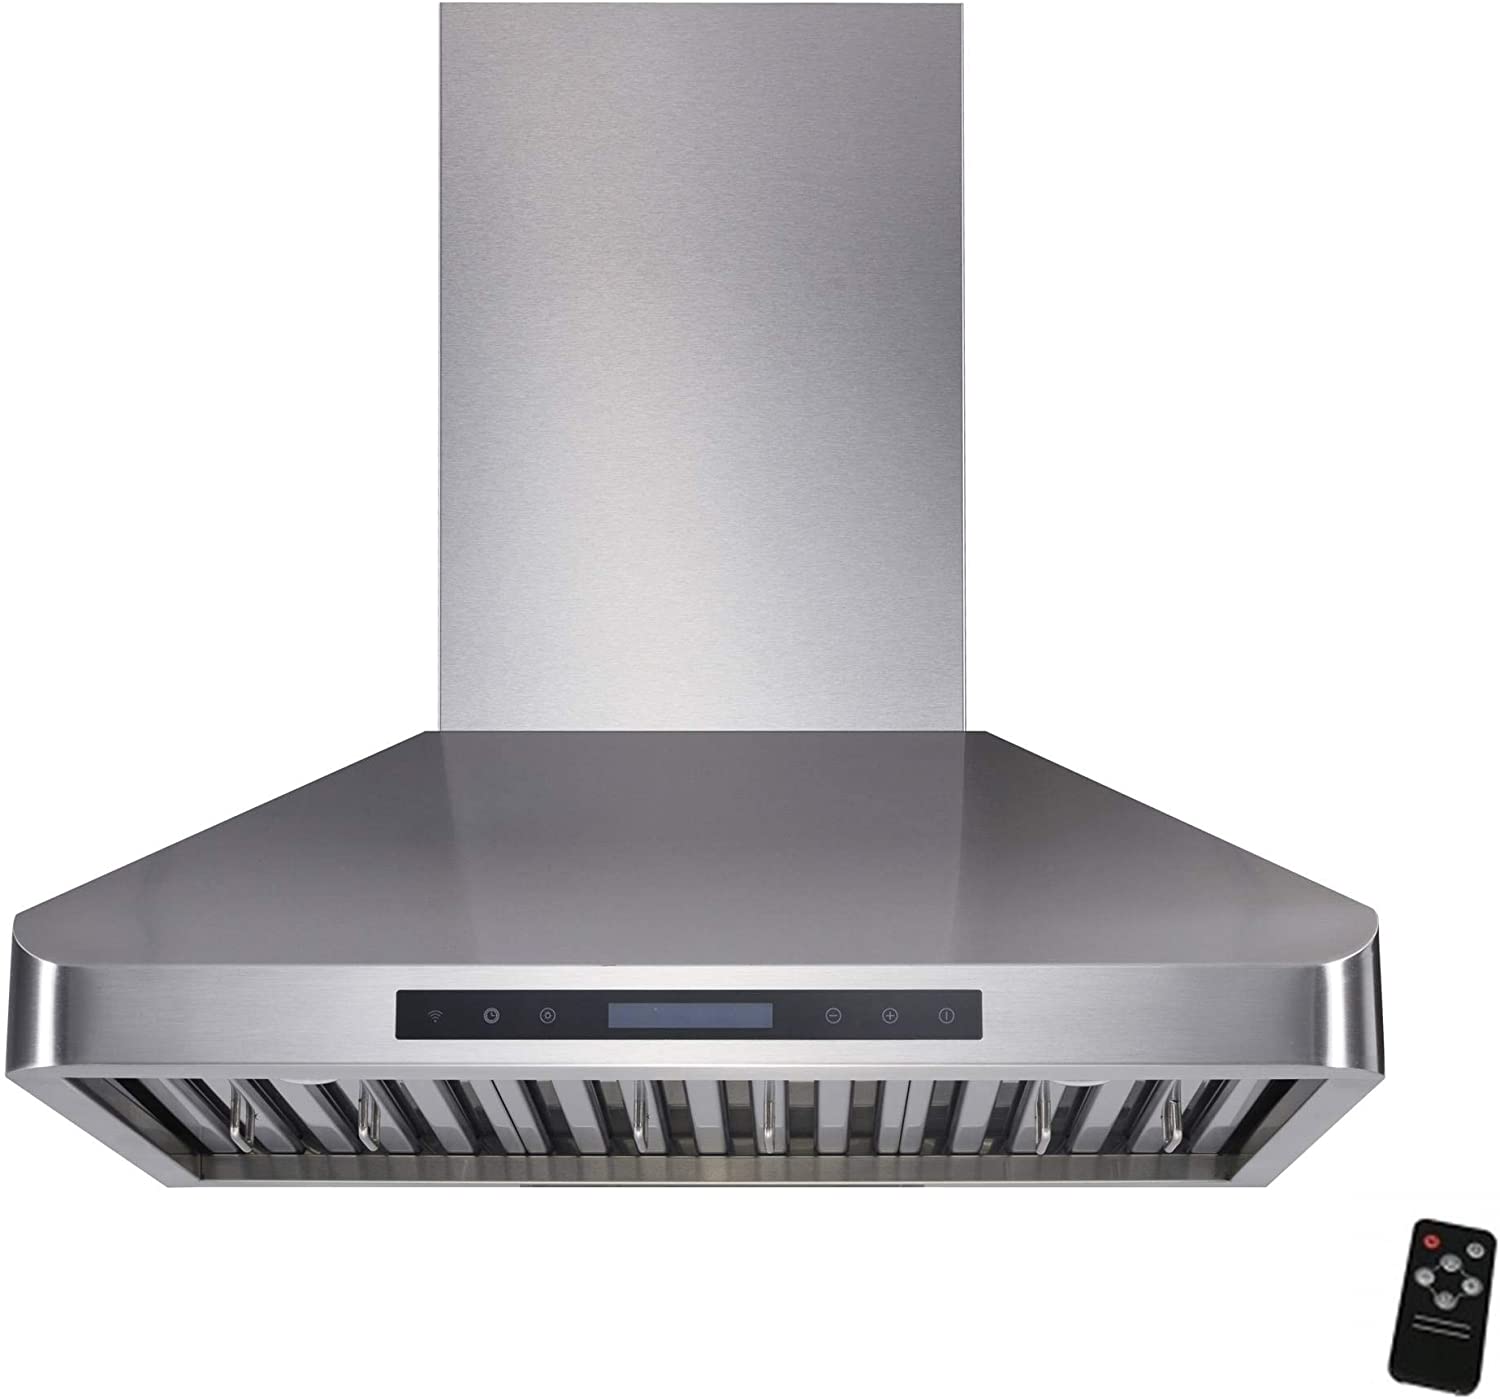 Awoco RH-WT-36XL 56-1/2"H Stainless Steel Range Hood 4 Speeds, 6” Round Top Vent 900CFM 2 LED Lights & Remote Control (36" Wall Mount XL)